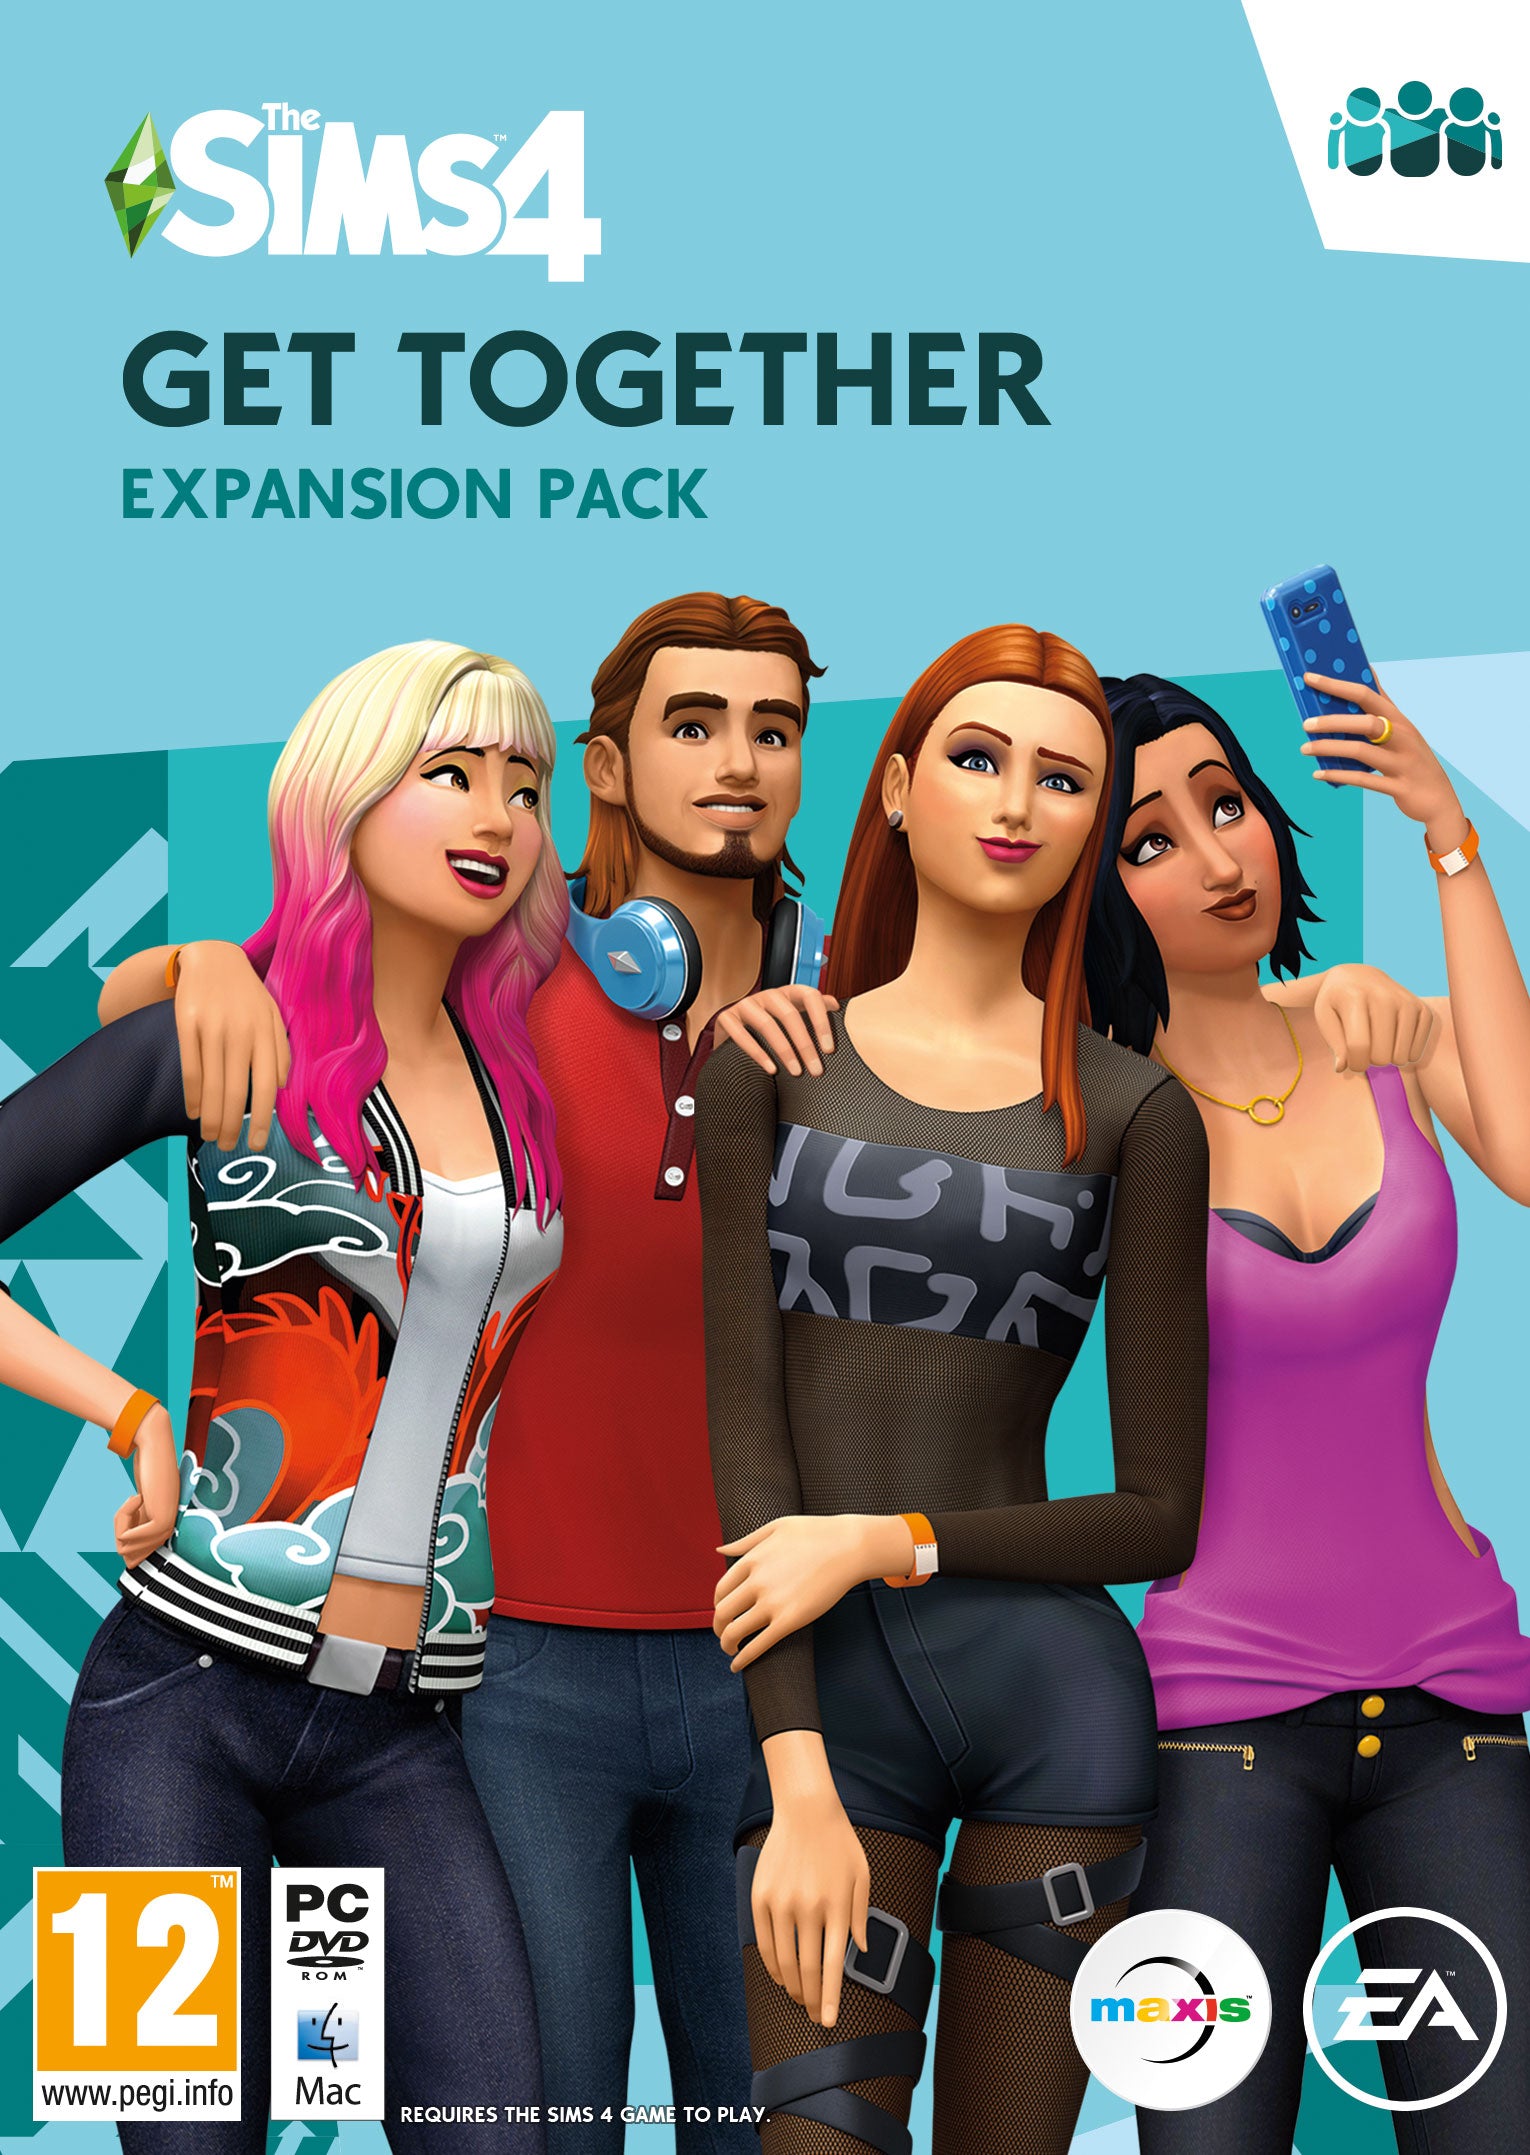 Image of The Sims 4 Get Together expansion pack for PC/Mac